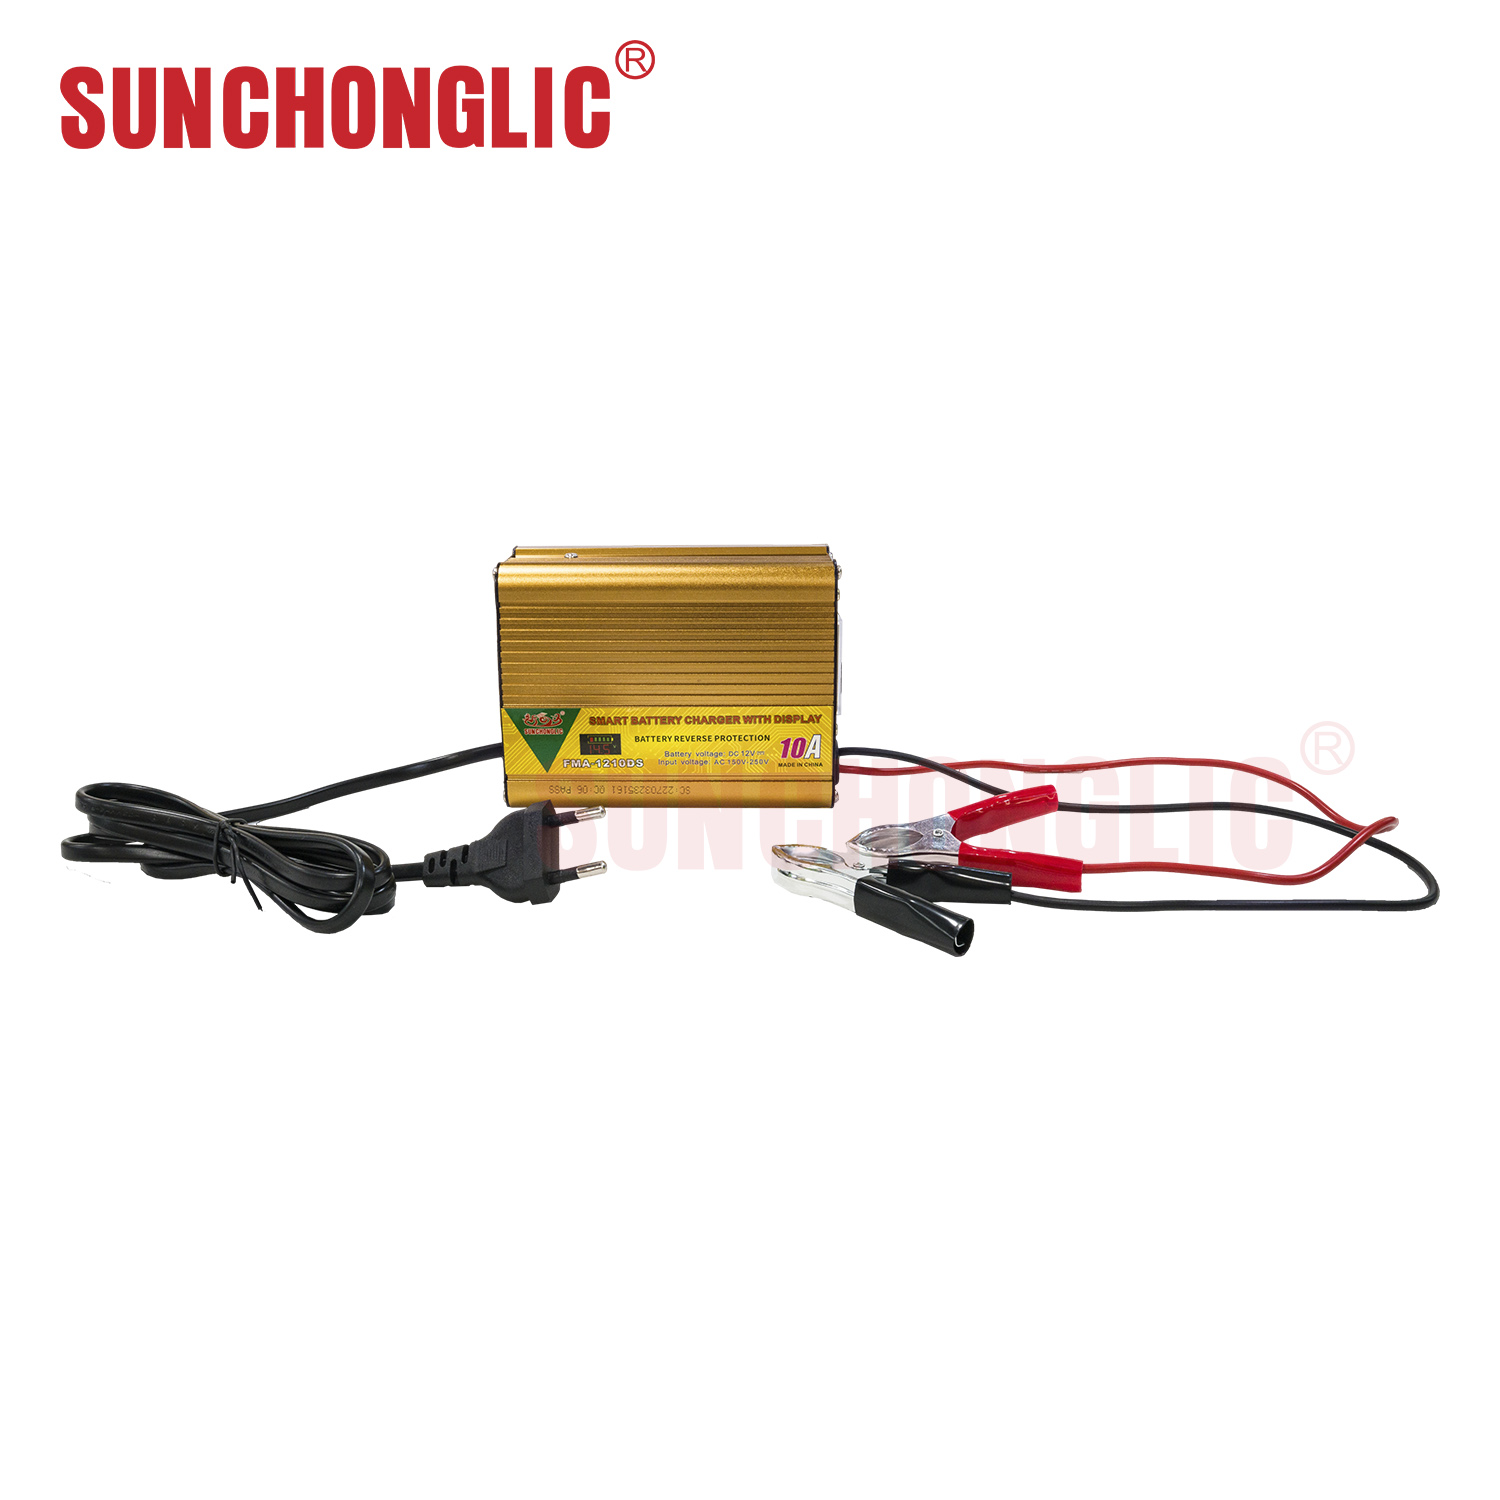 Sunchonglic 12V 10A intelligent battery charger AGM GEL Lead acid battery charger